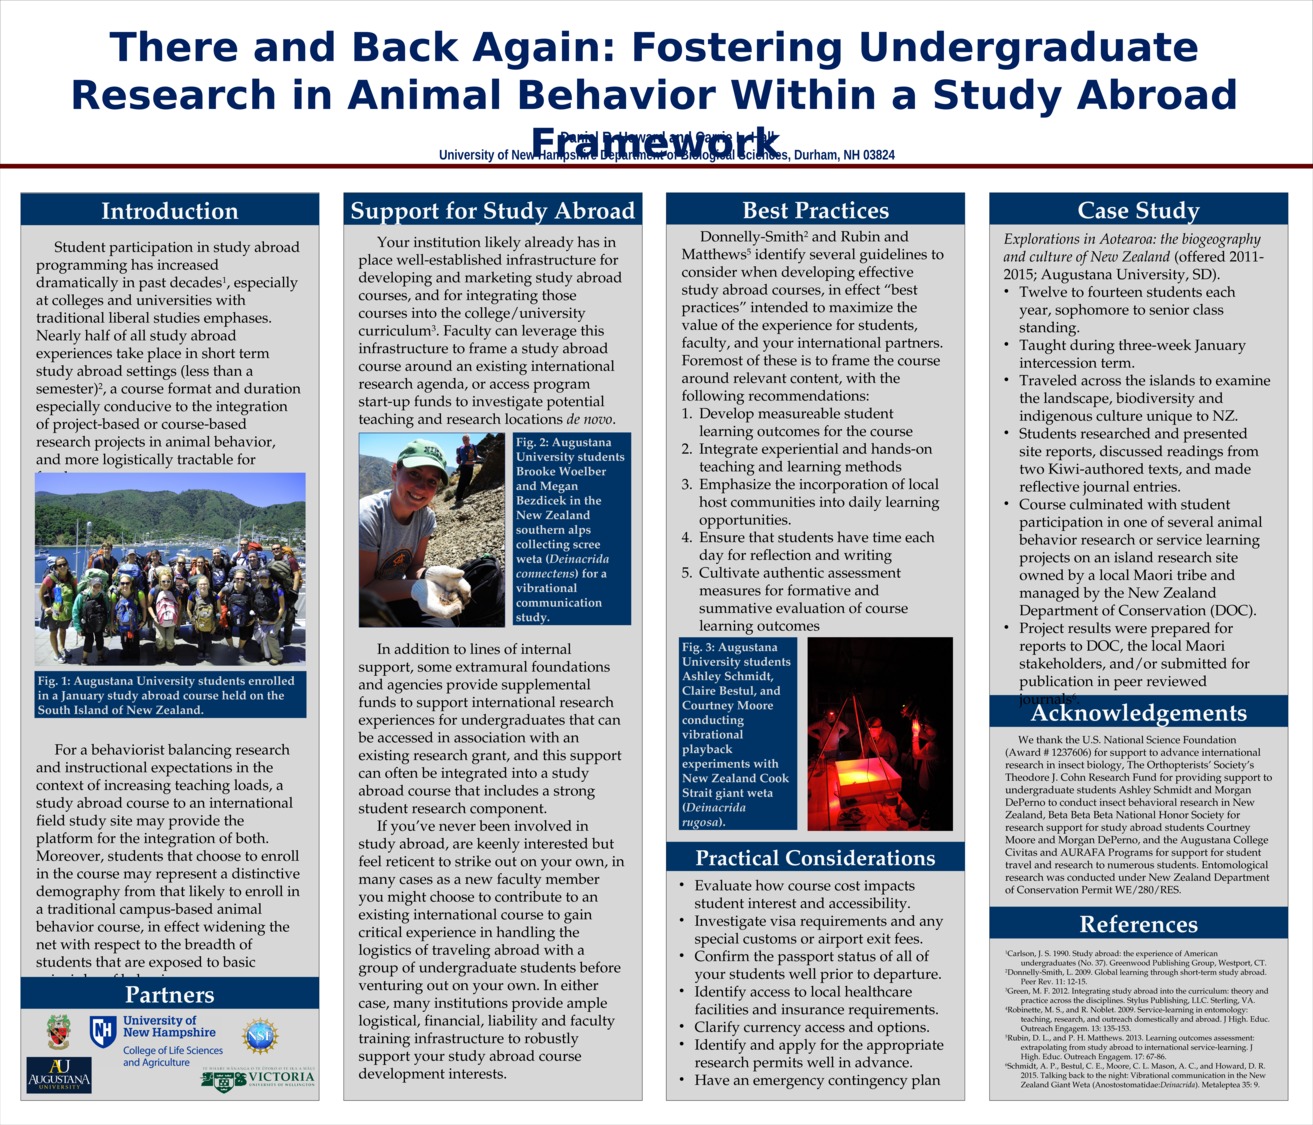 There And Back Again: Fostering Undergraduate Research In Animal Behavior Within A Study Abroad Framework by drh1011